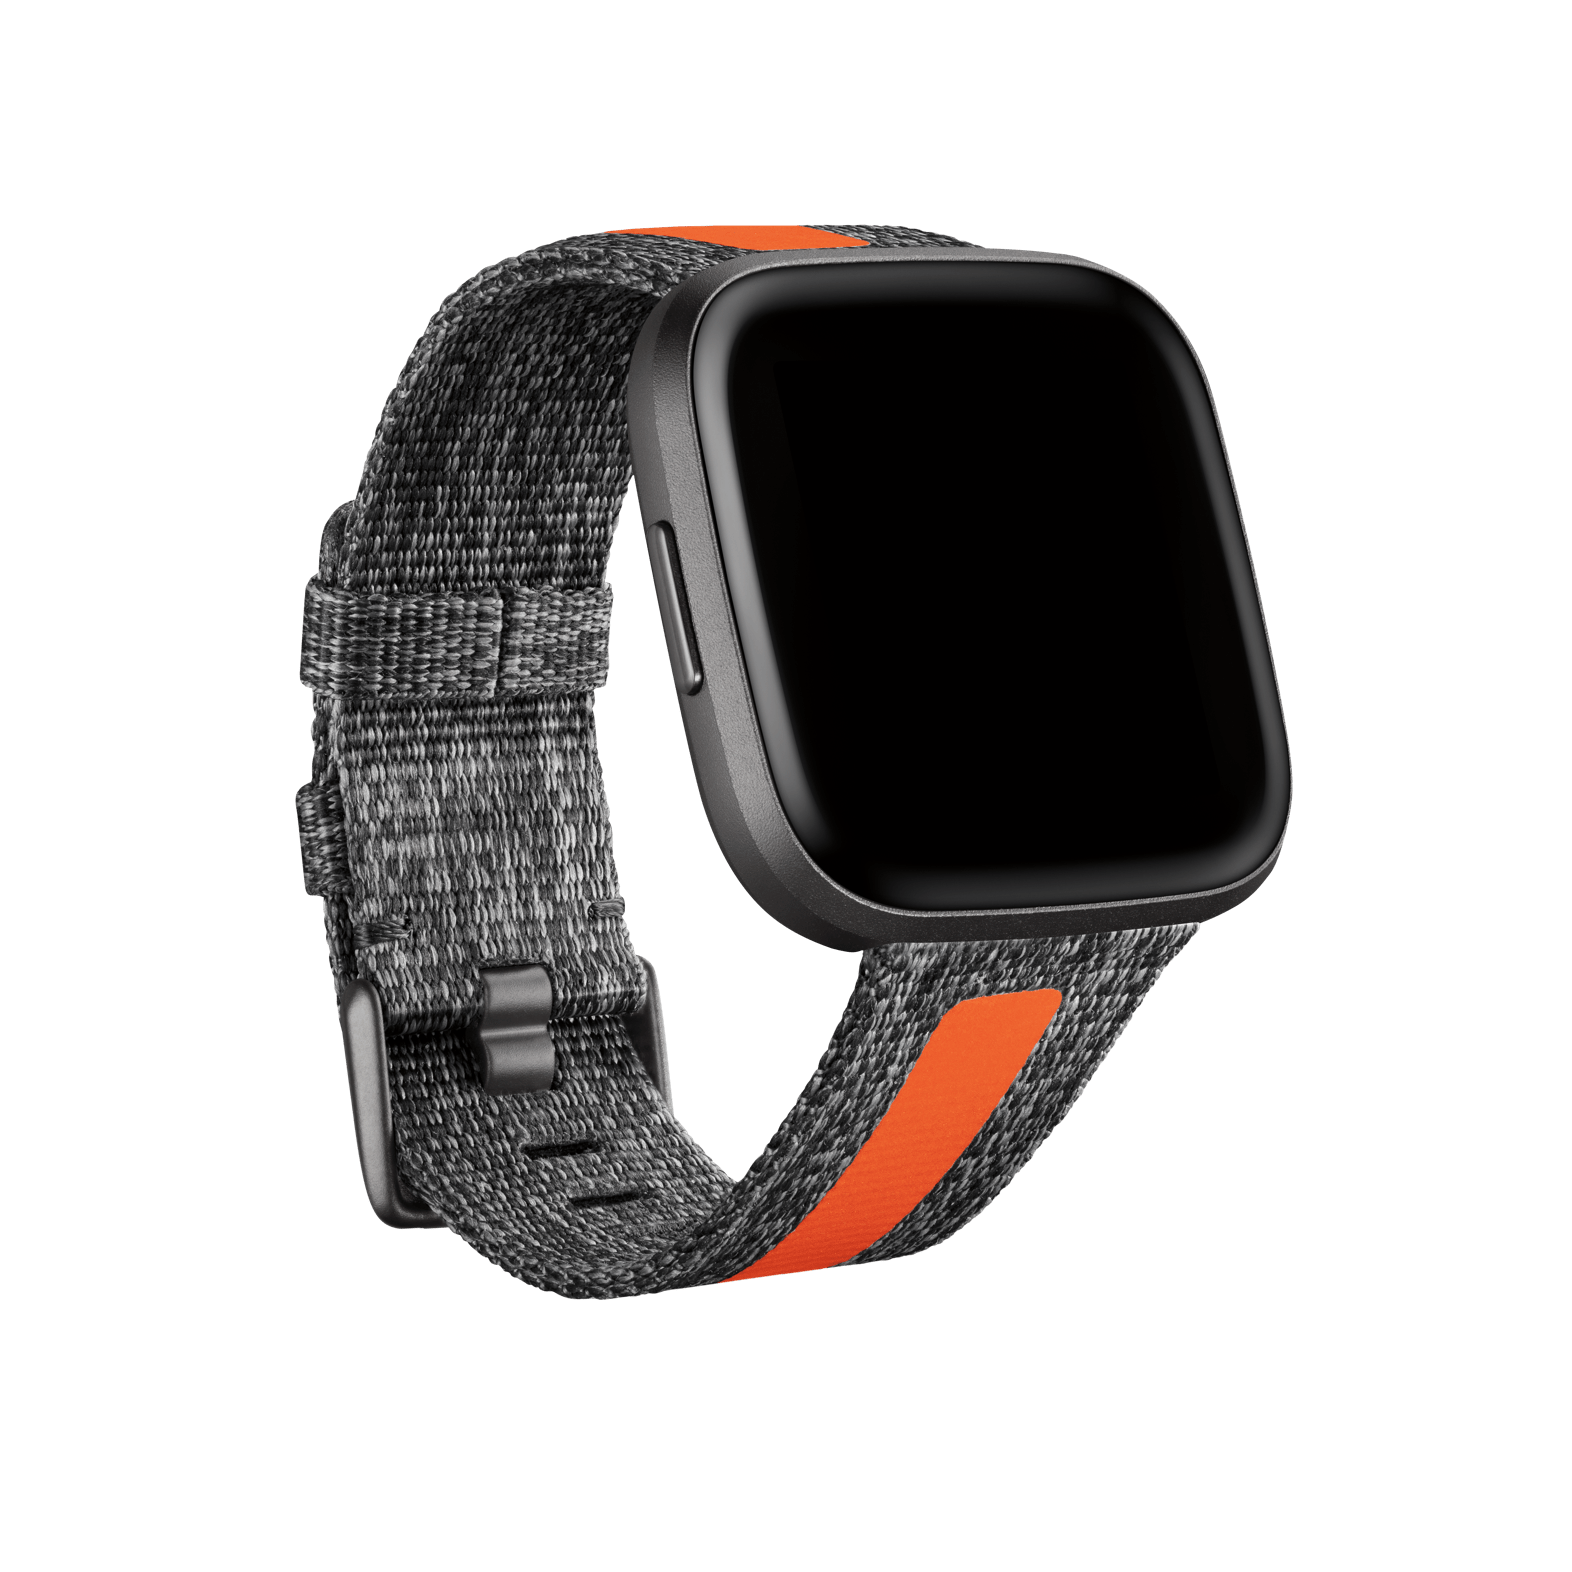 YJYdada Luxury woven Fabric Replacement Accessories Wristband Straps For Fitbit Versa black